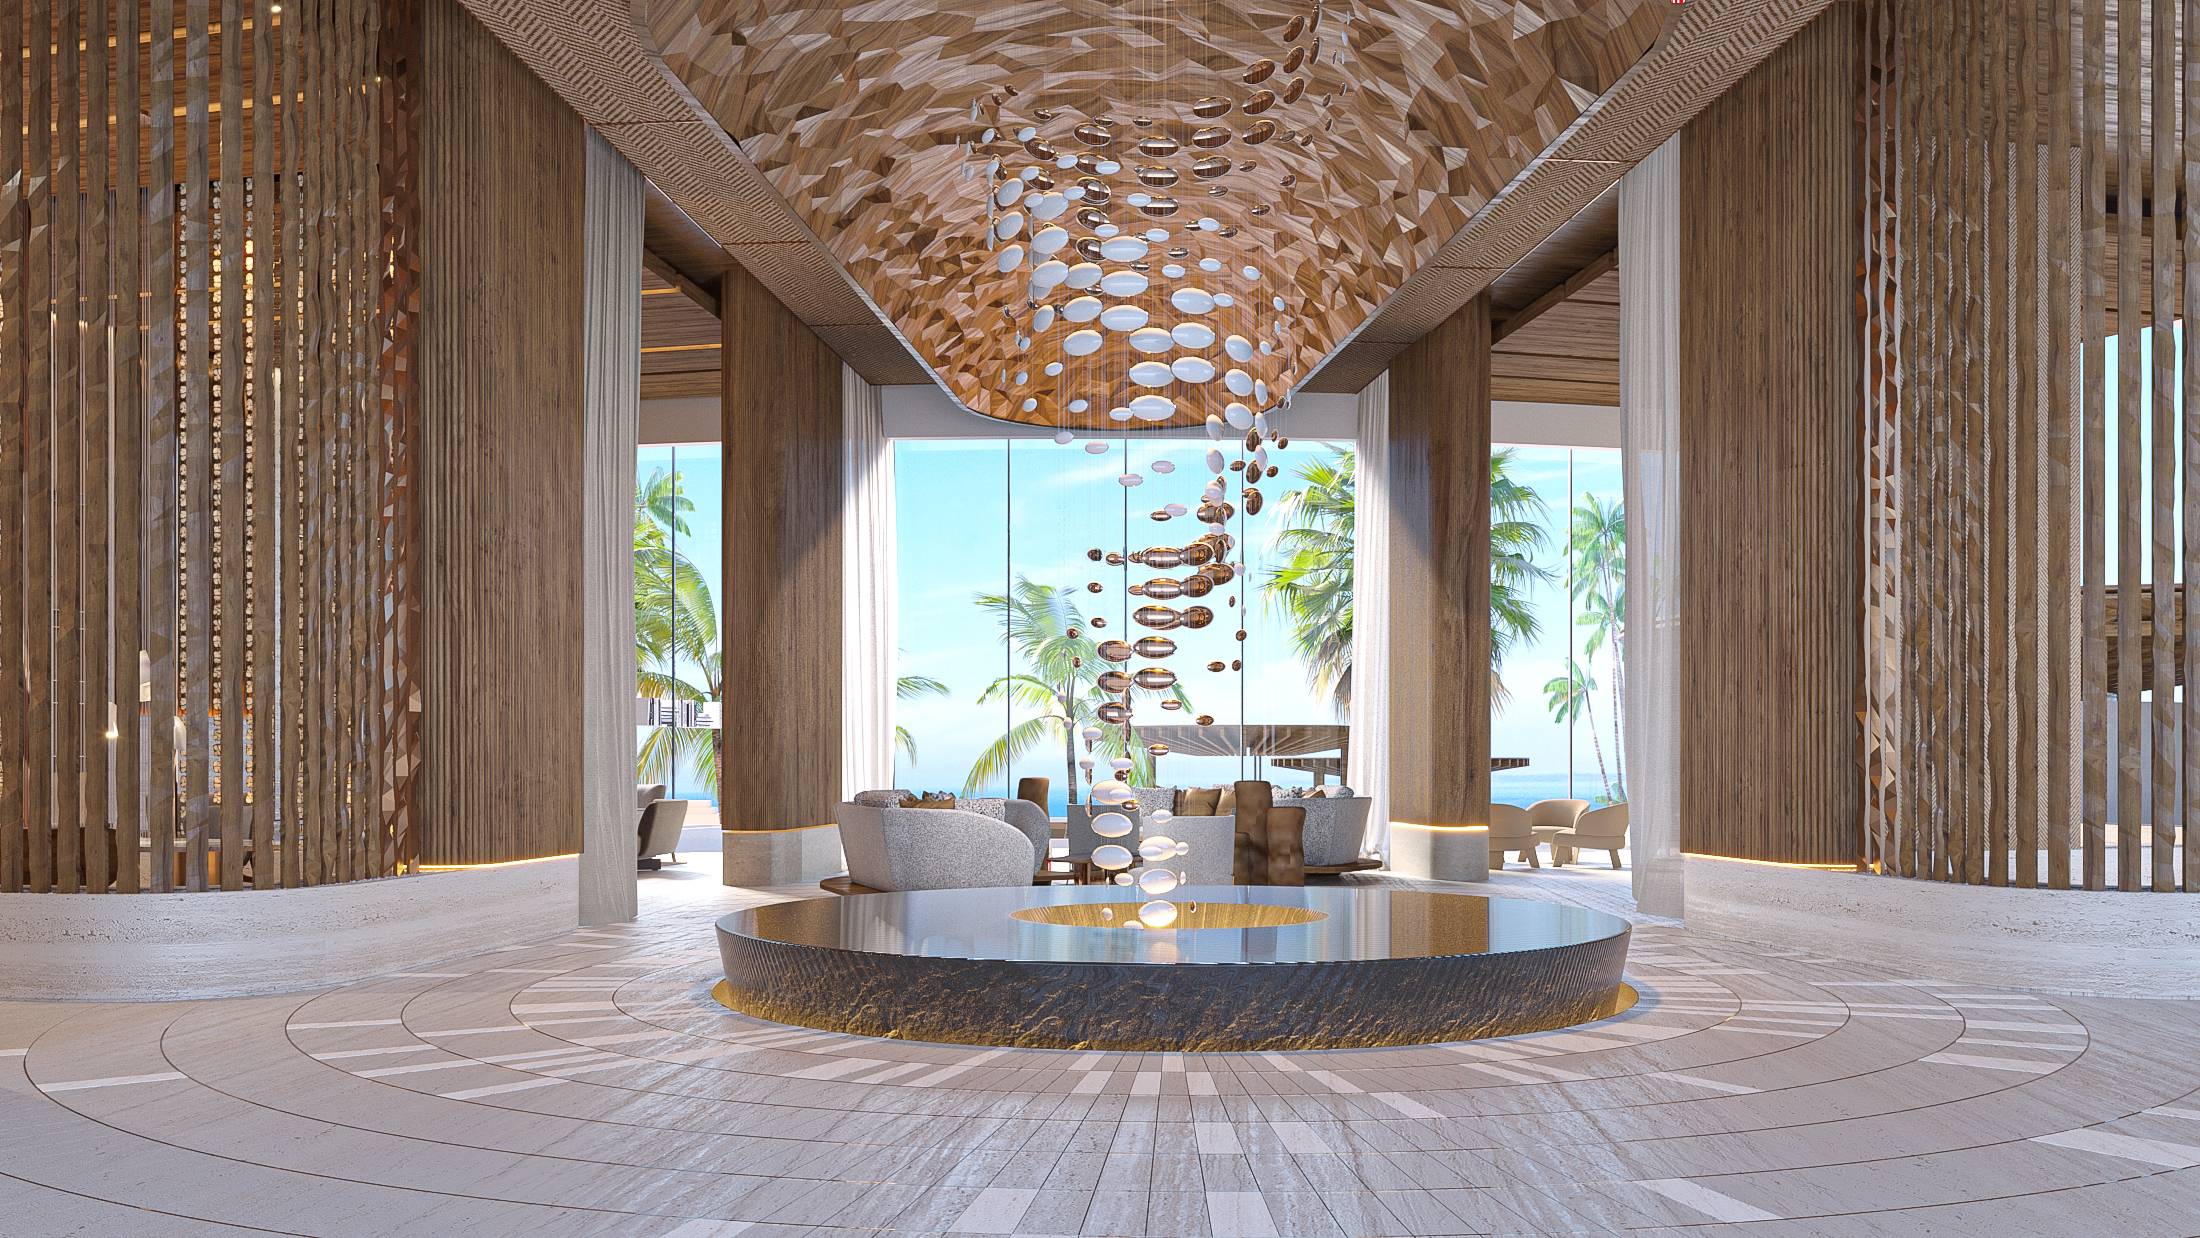 St. Regis Costa Mujeres- The Residences